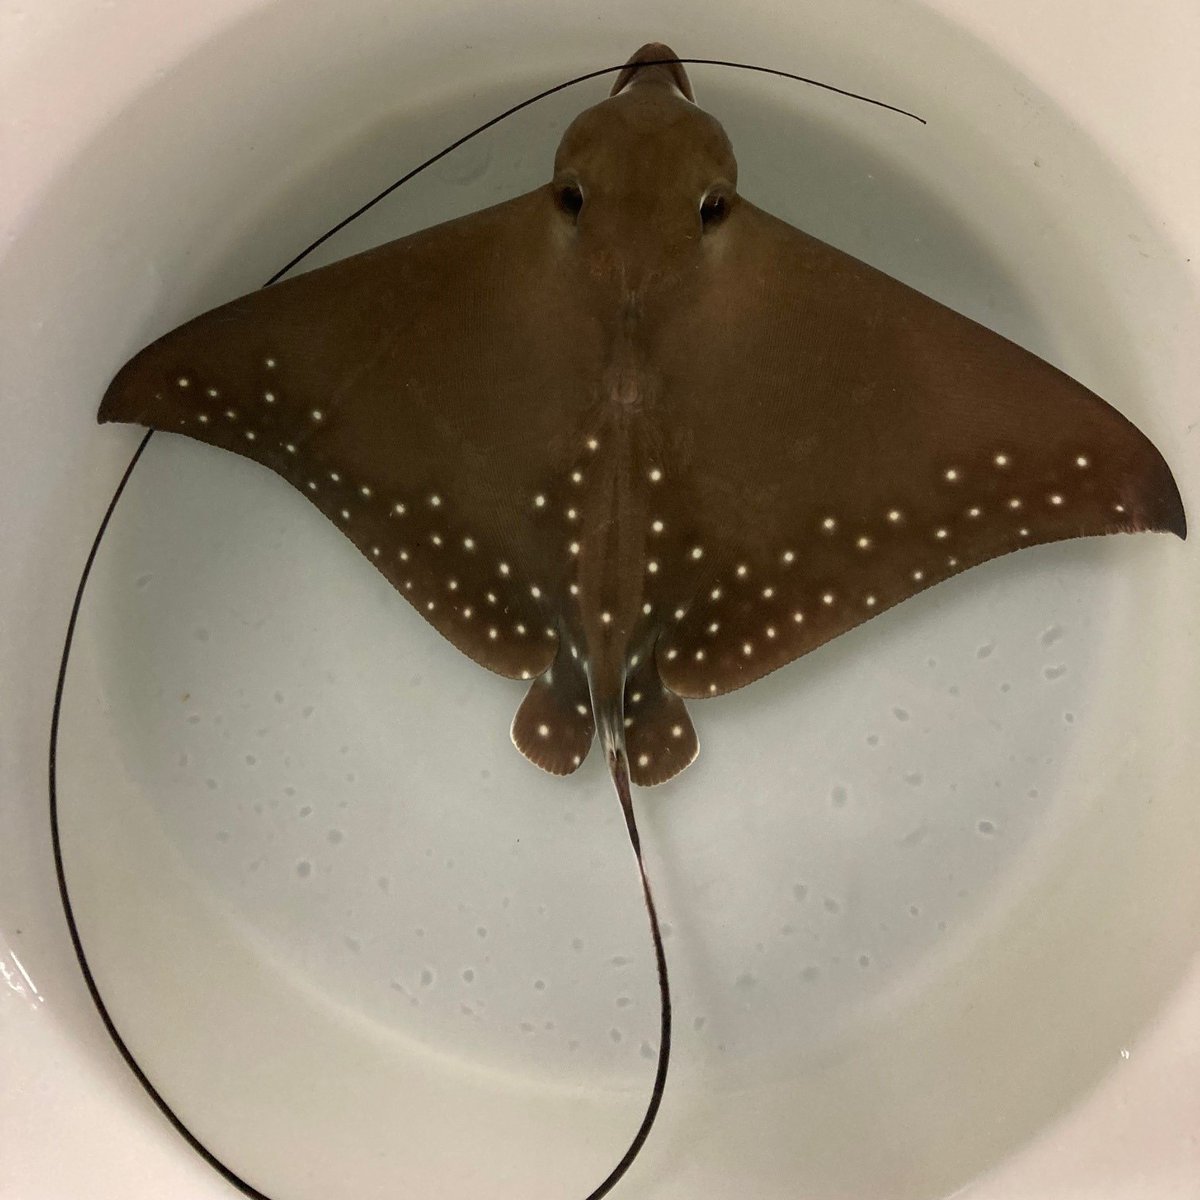 Say hello to the newest arrivals @PlaneteNAUSICAA. The aquarium in France has welcomed the birth of two eagle ray pups. 😍 Congratulations to the animal care teams on this breeding success!